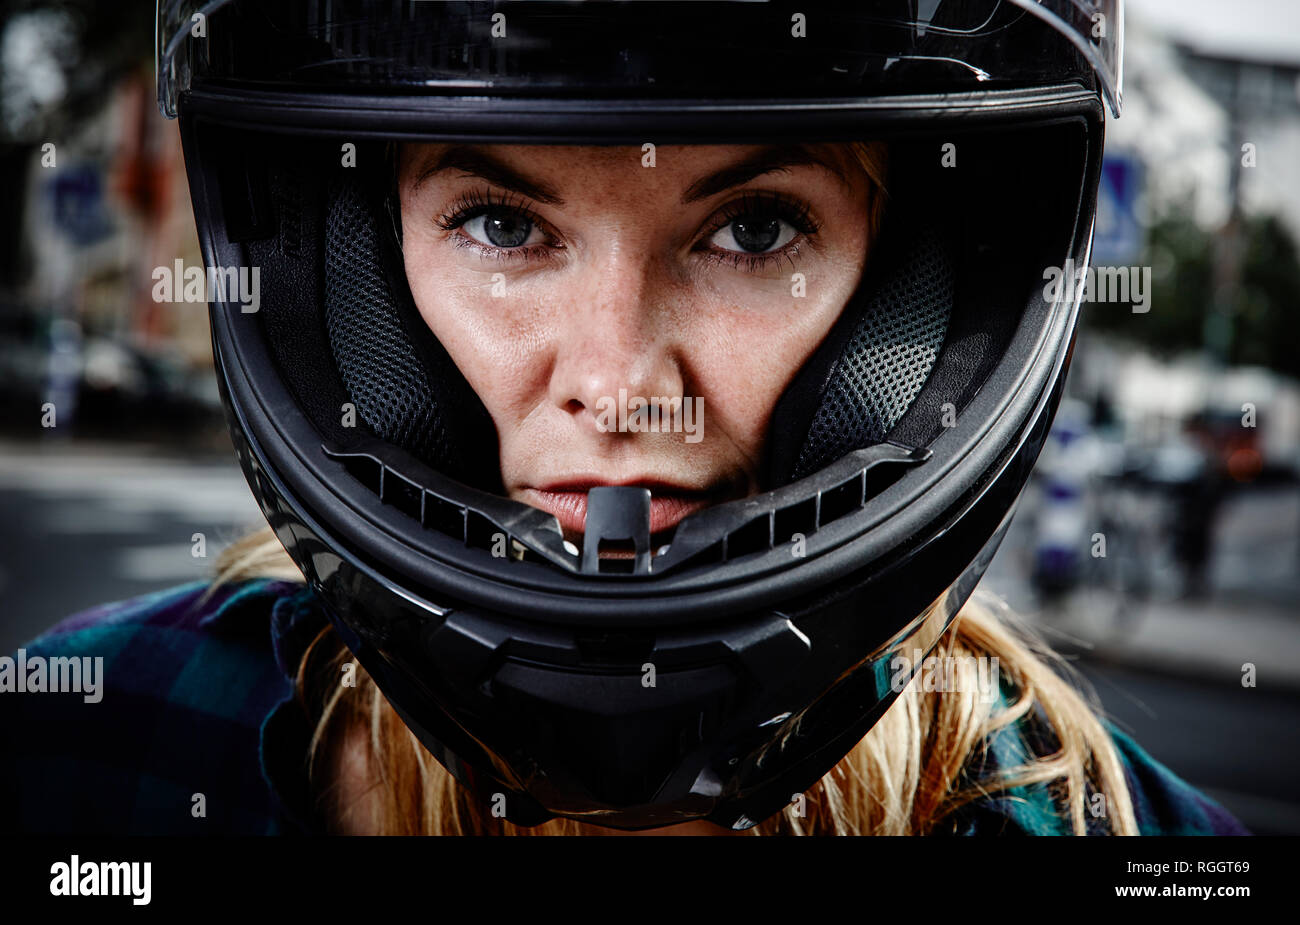 Portrait of confident young woman wearing motorcycle helmet Stock Photo